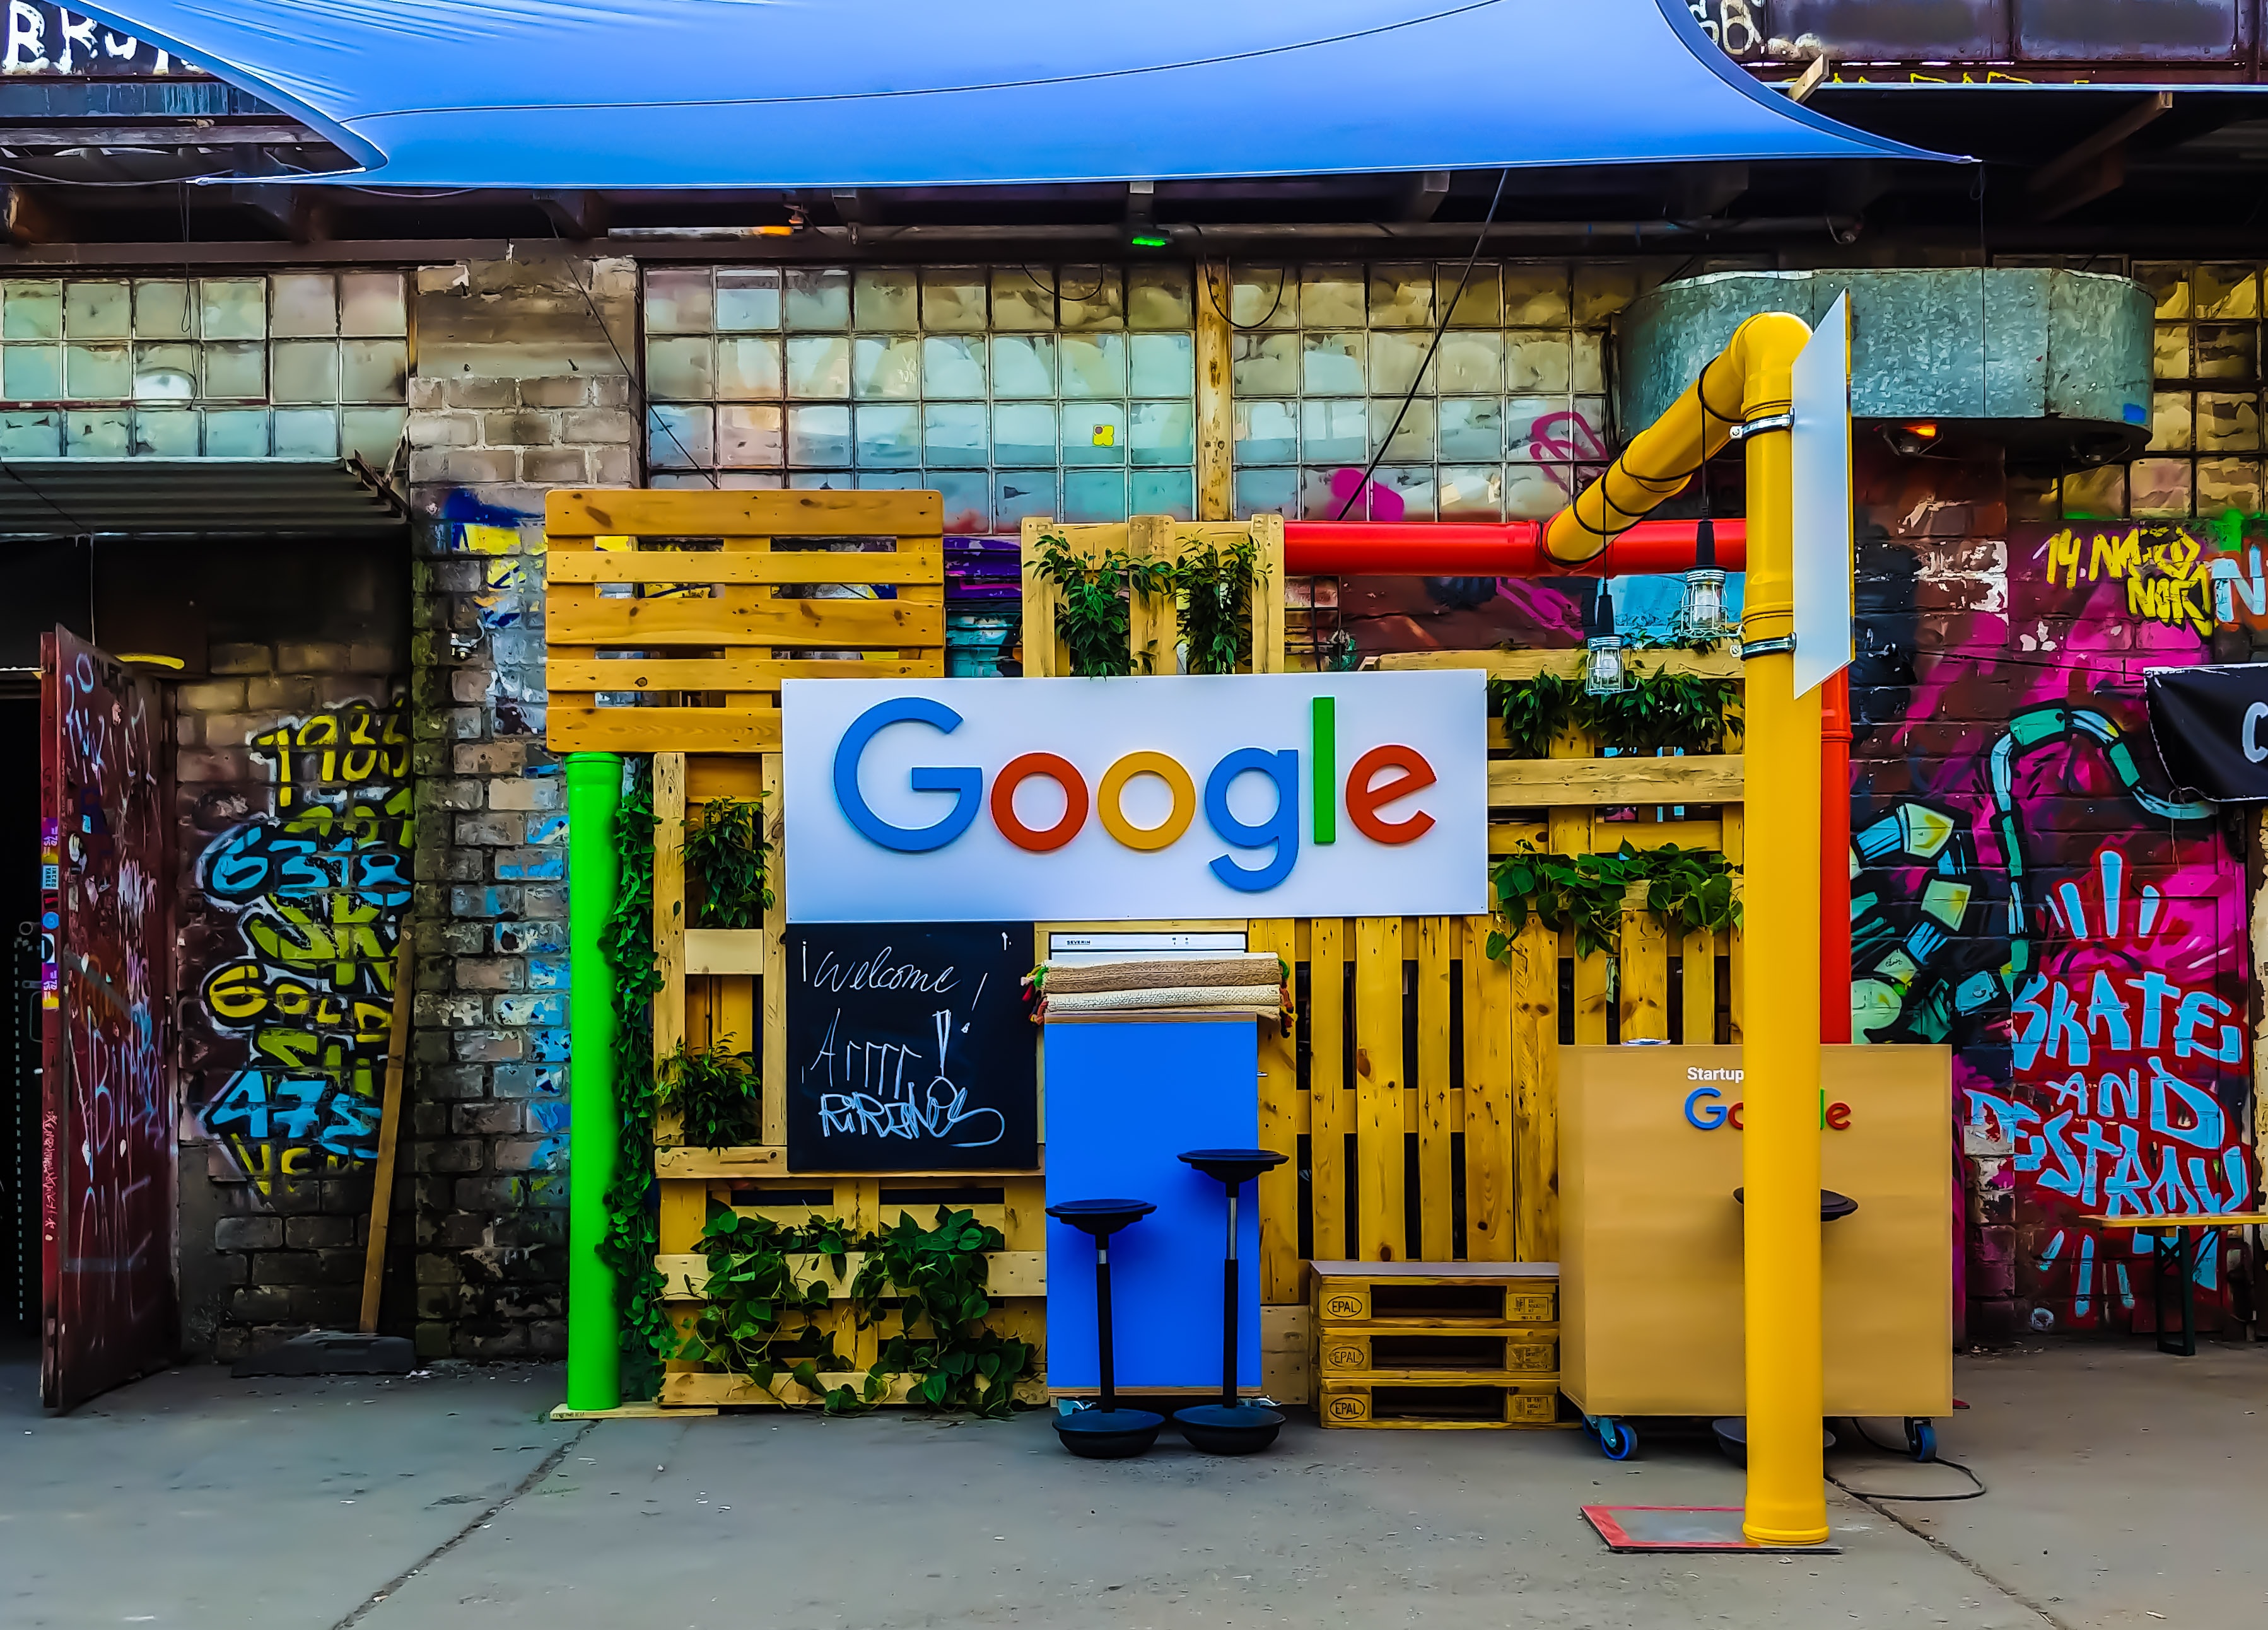 A booth with a Google sign